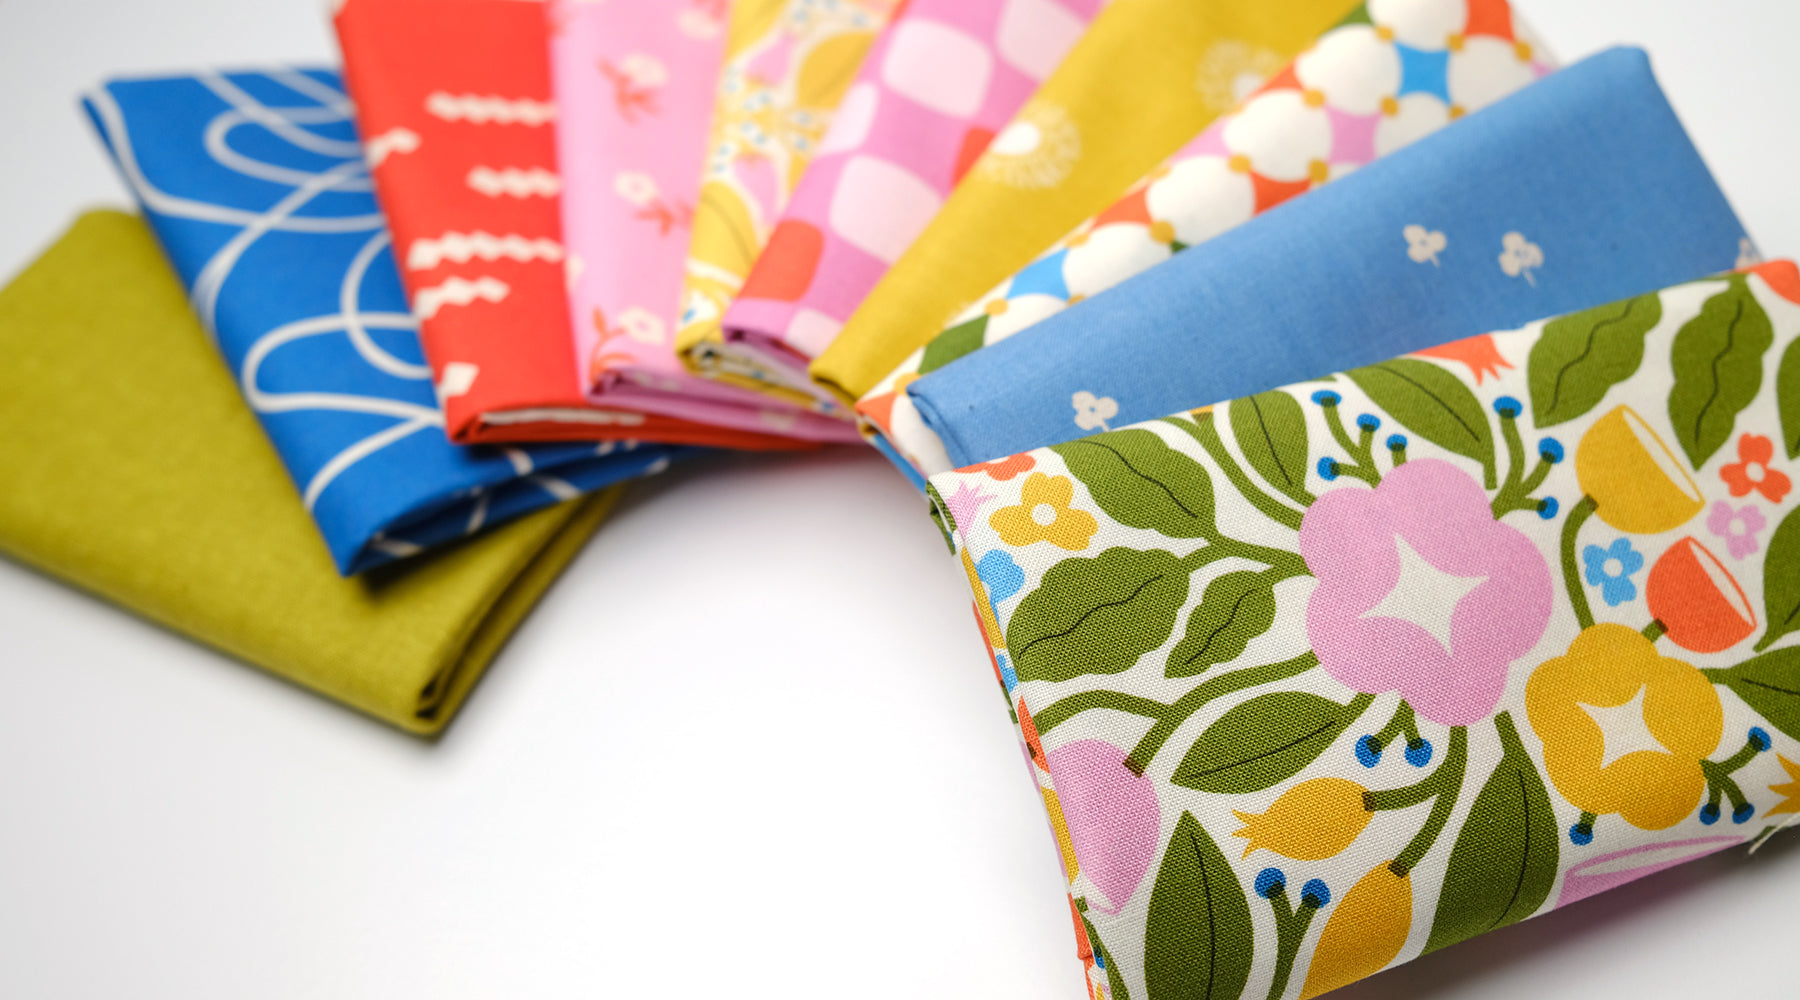 Splendid Speck - Hand-picked Happiness - Bundles, Fabric, and Patterns